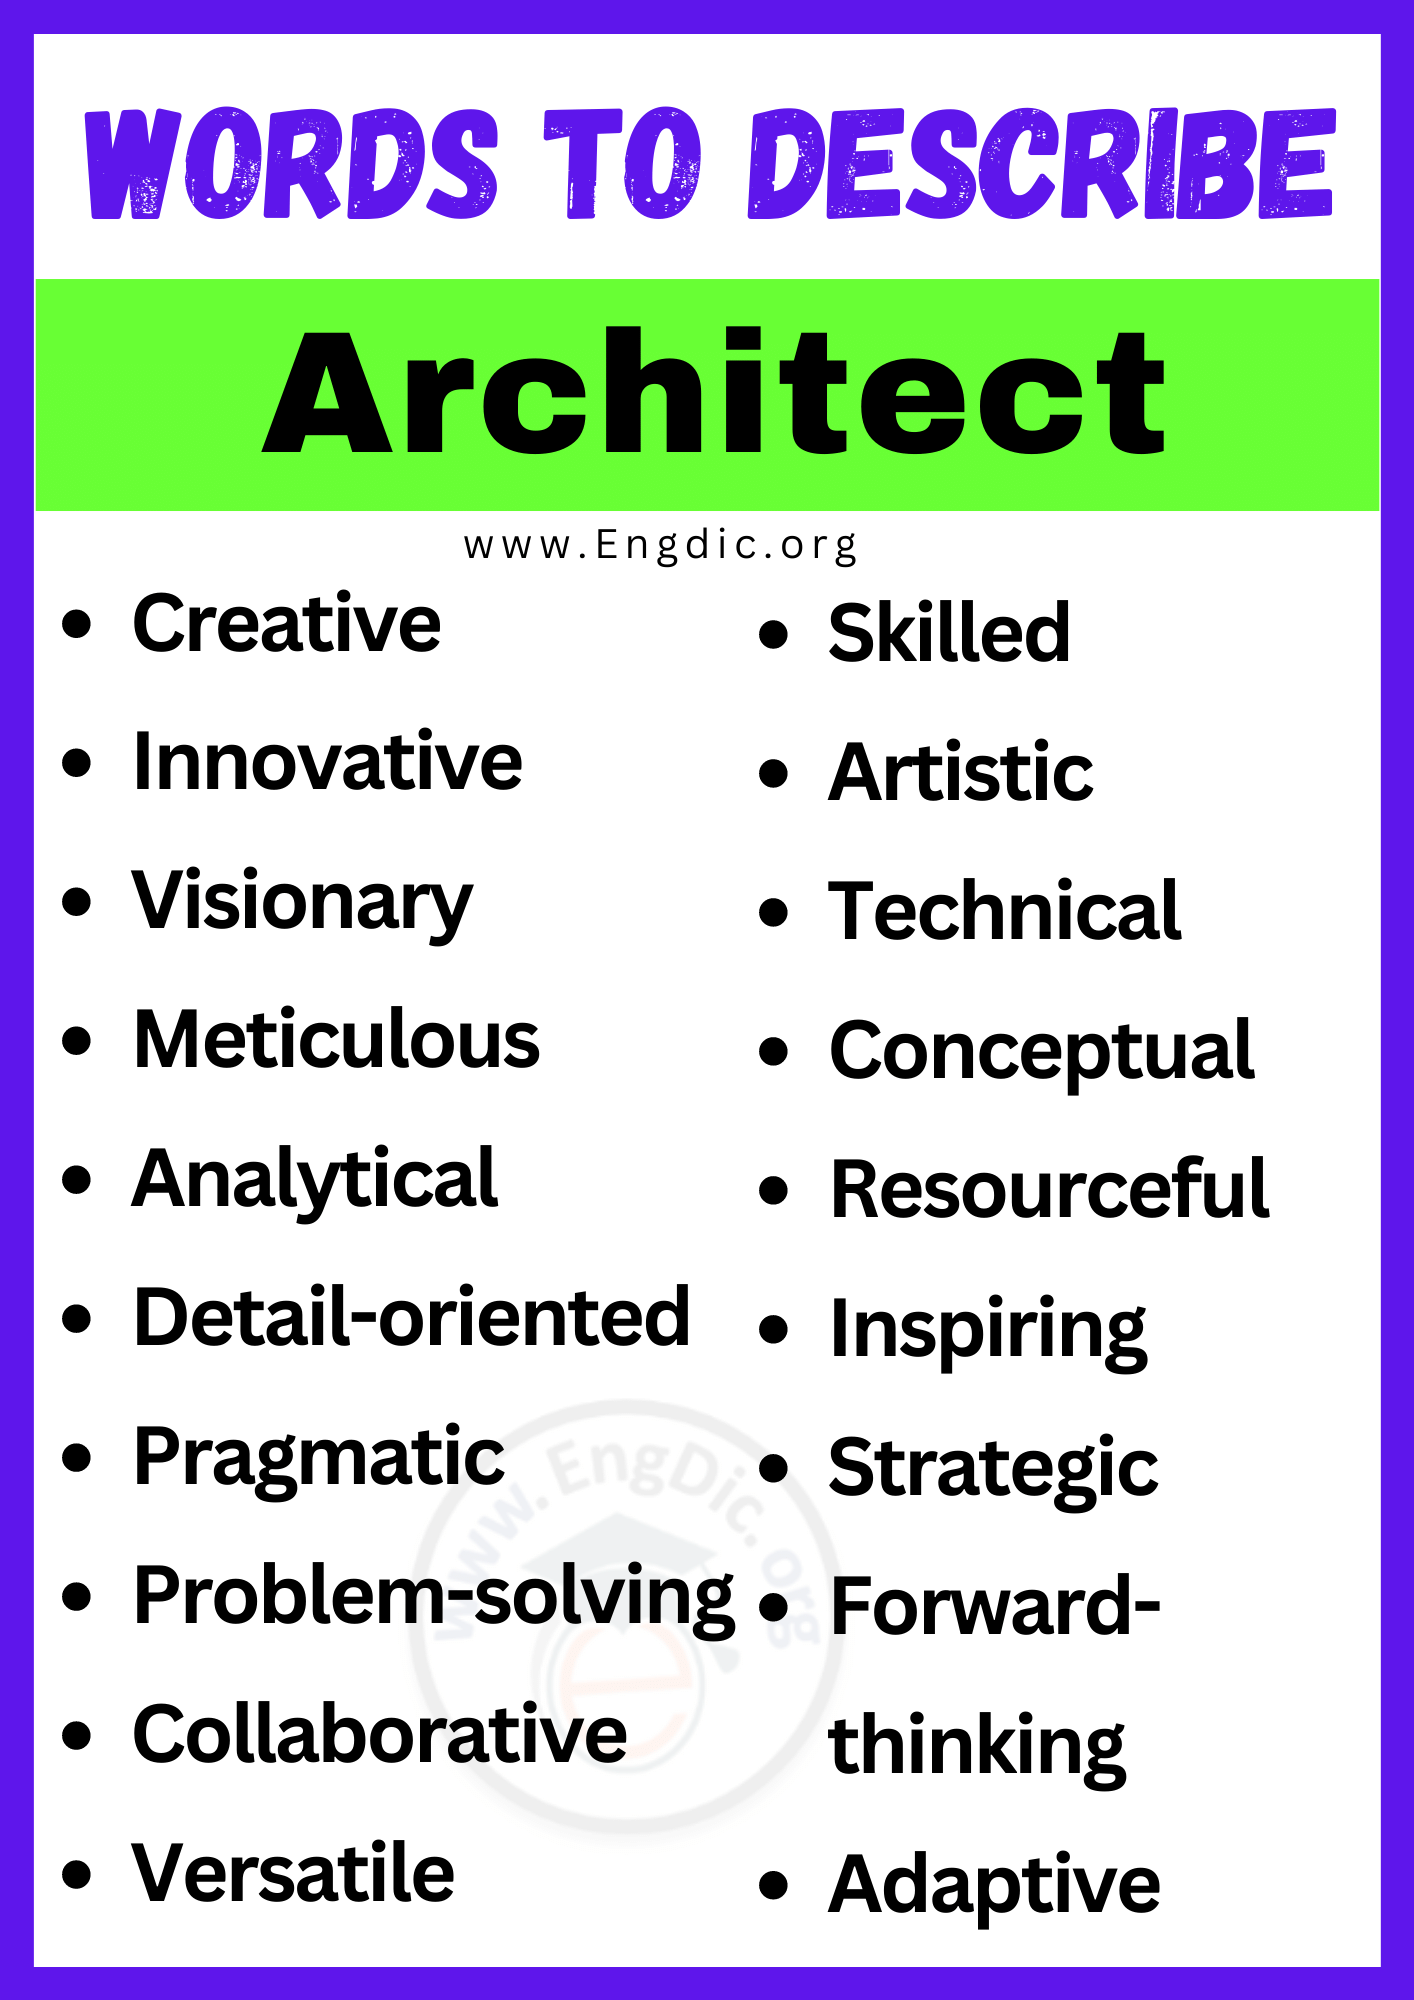 Words to Describe Architect